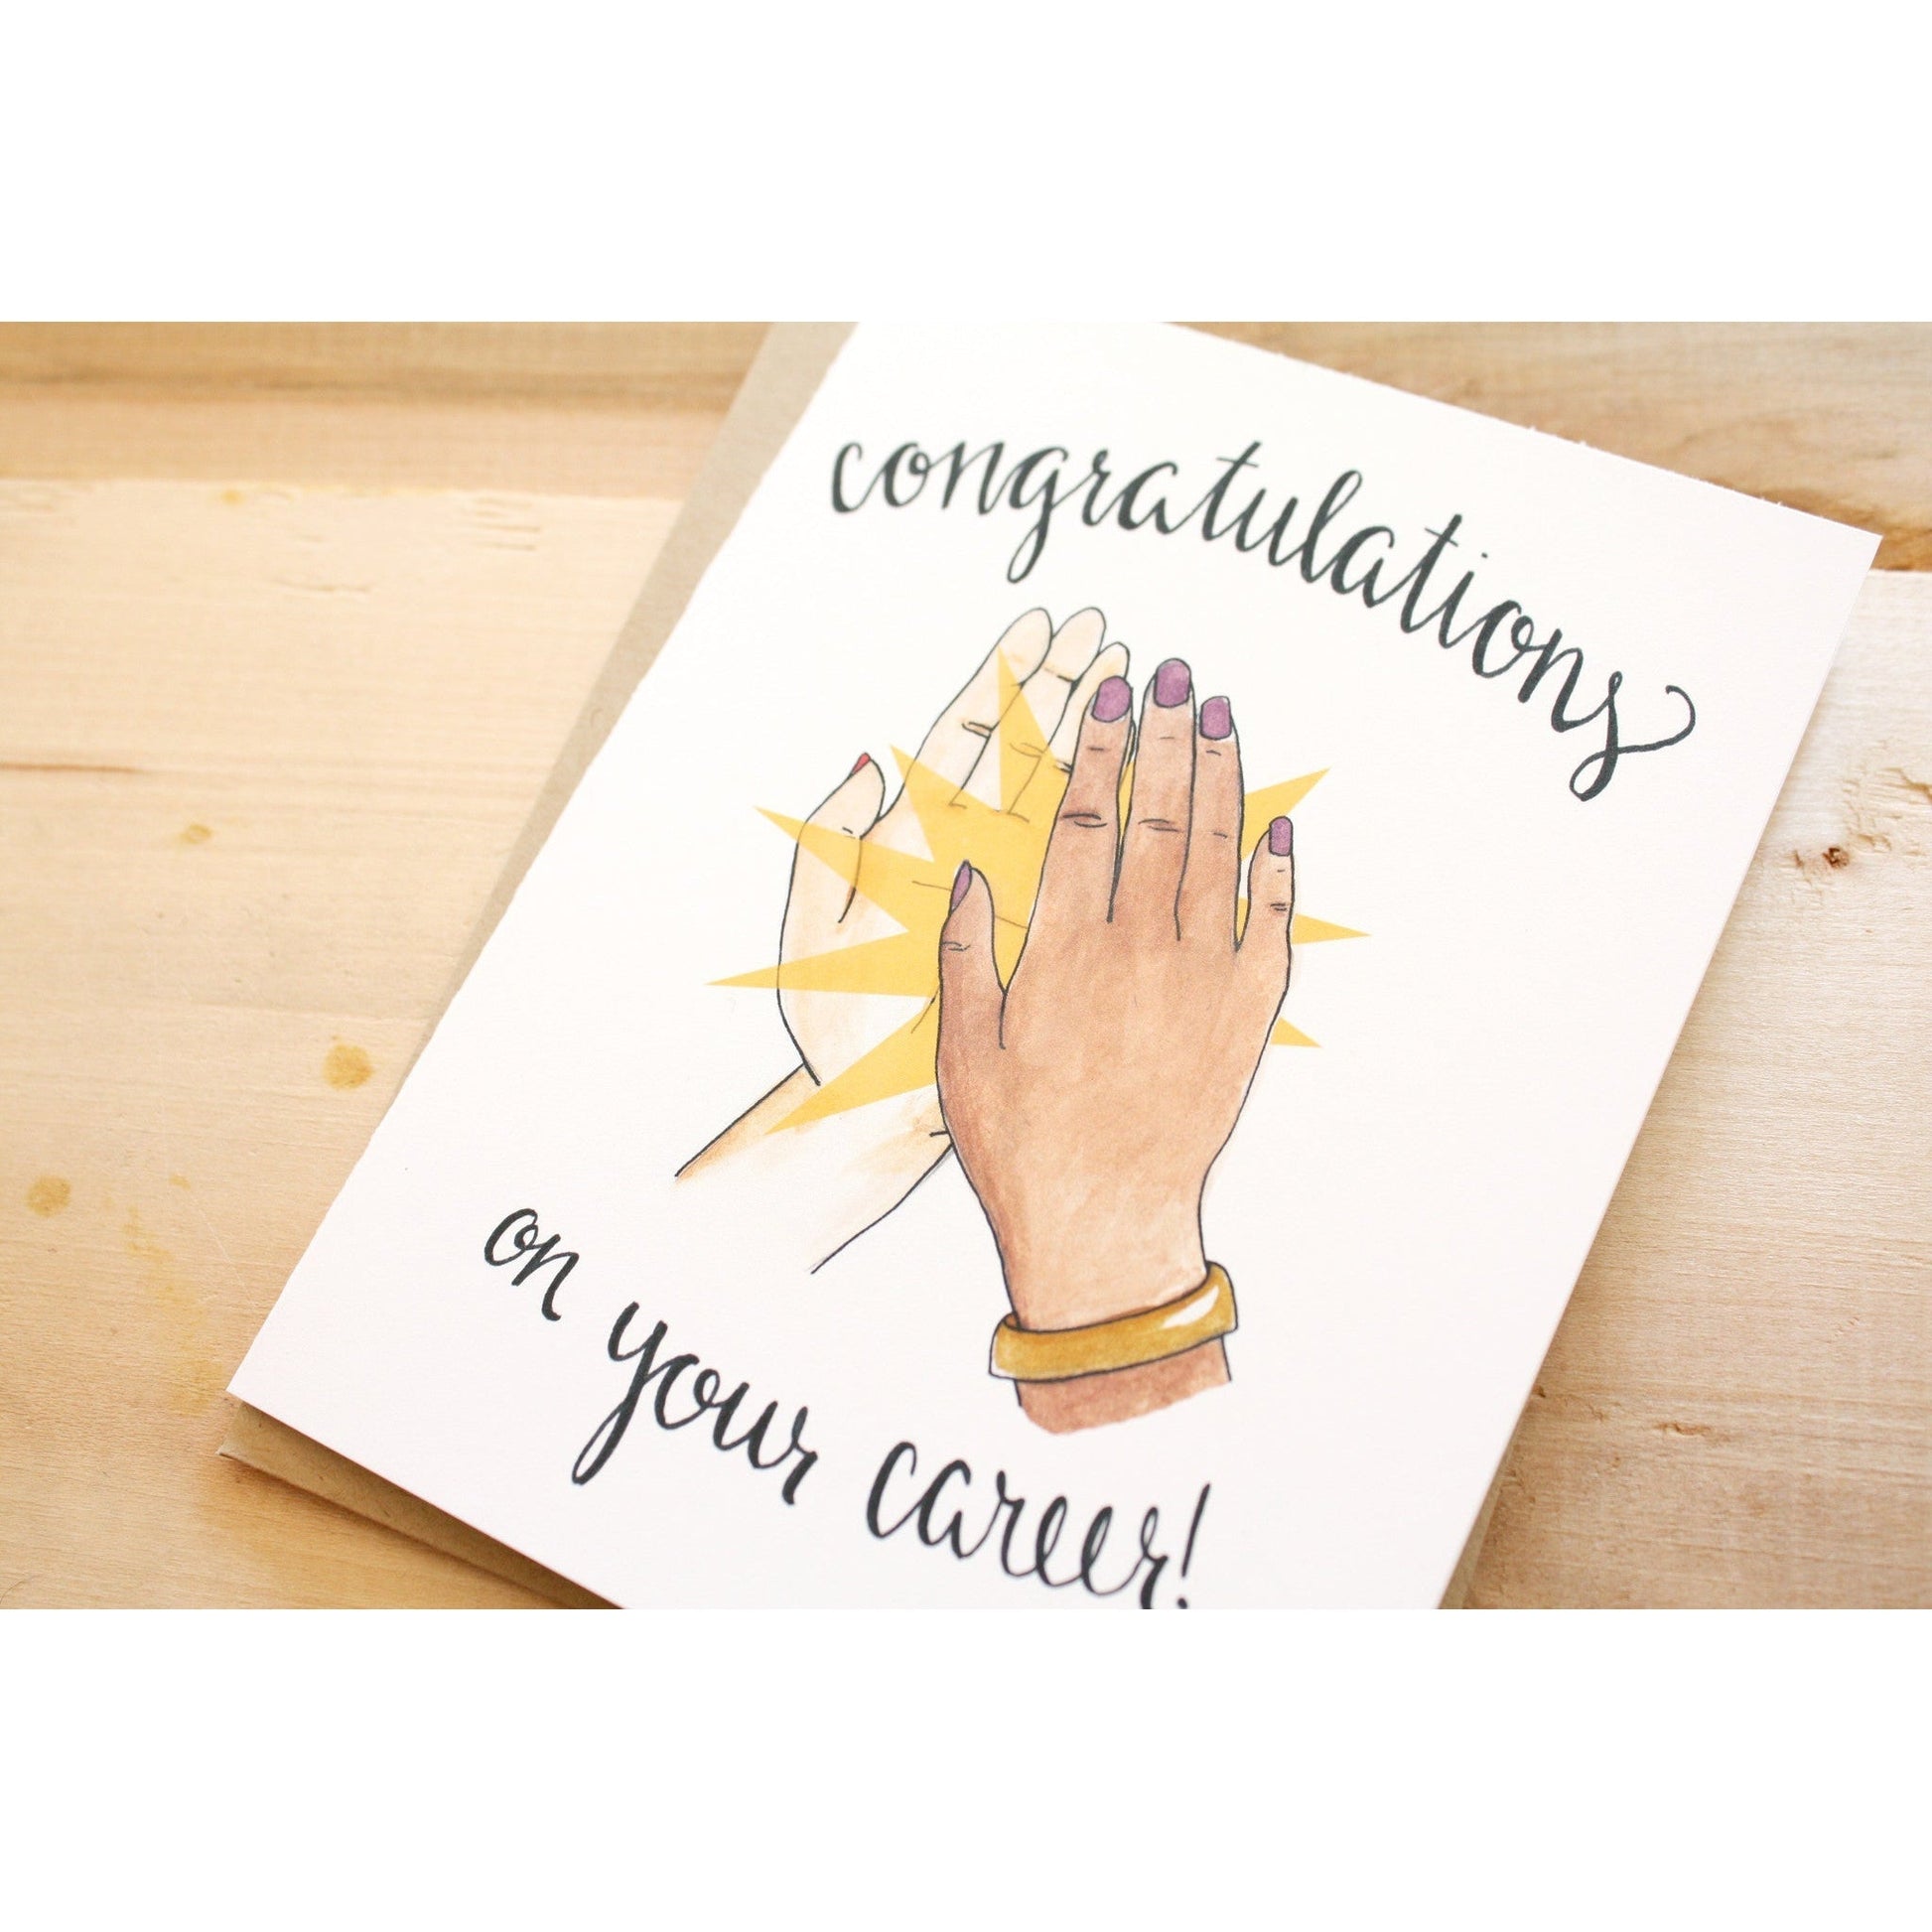 Congratulations on Your Career! High-Five Feminist Greeting Card